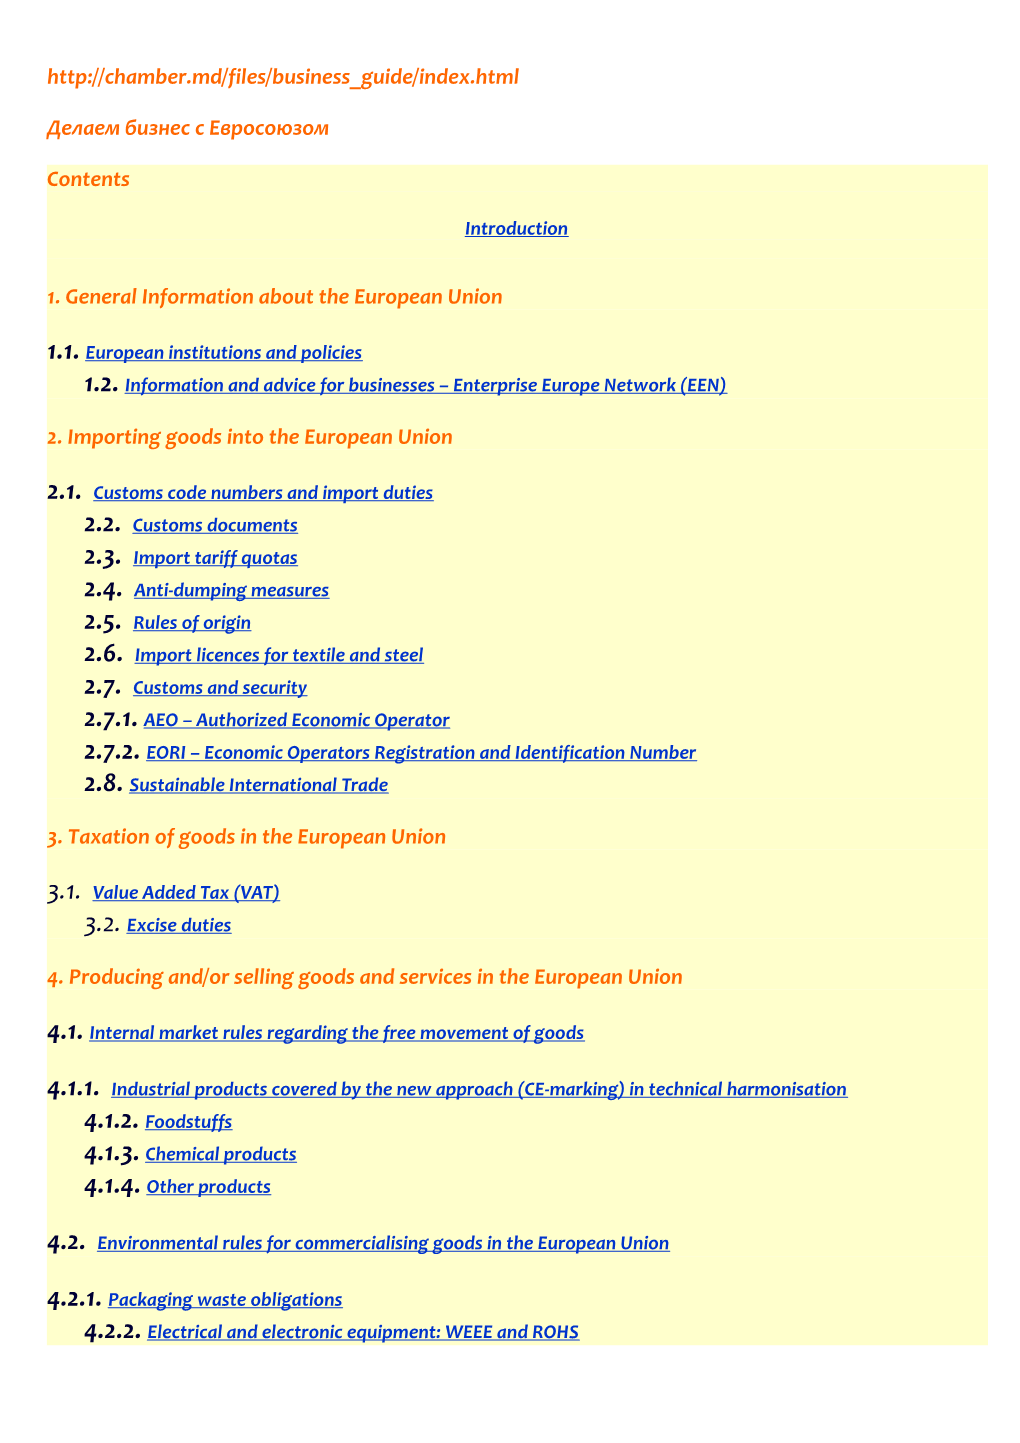 1. General Information About the European Union